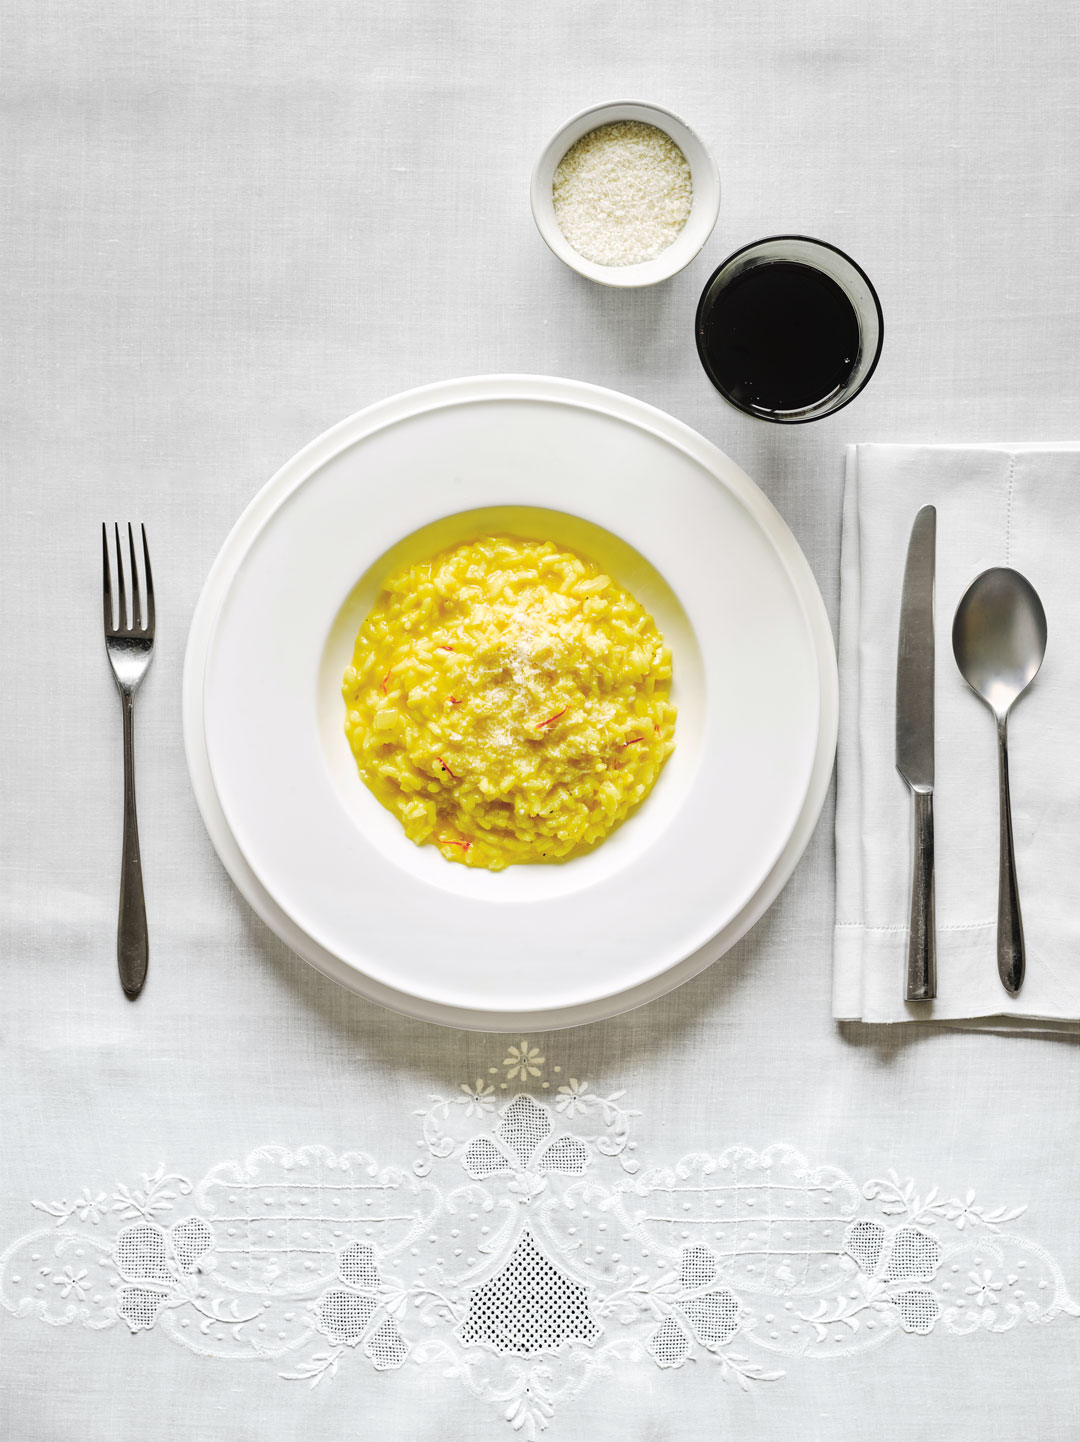 Milanese risotto. All images from The Silver Spoon Classic